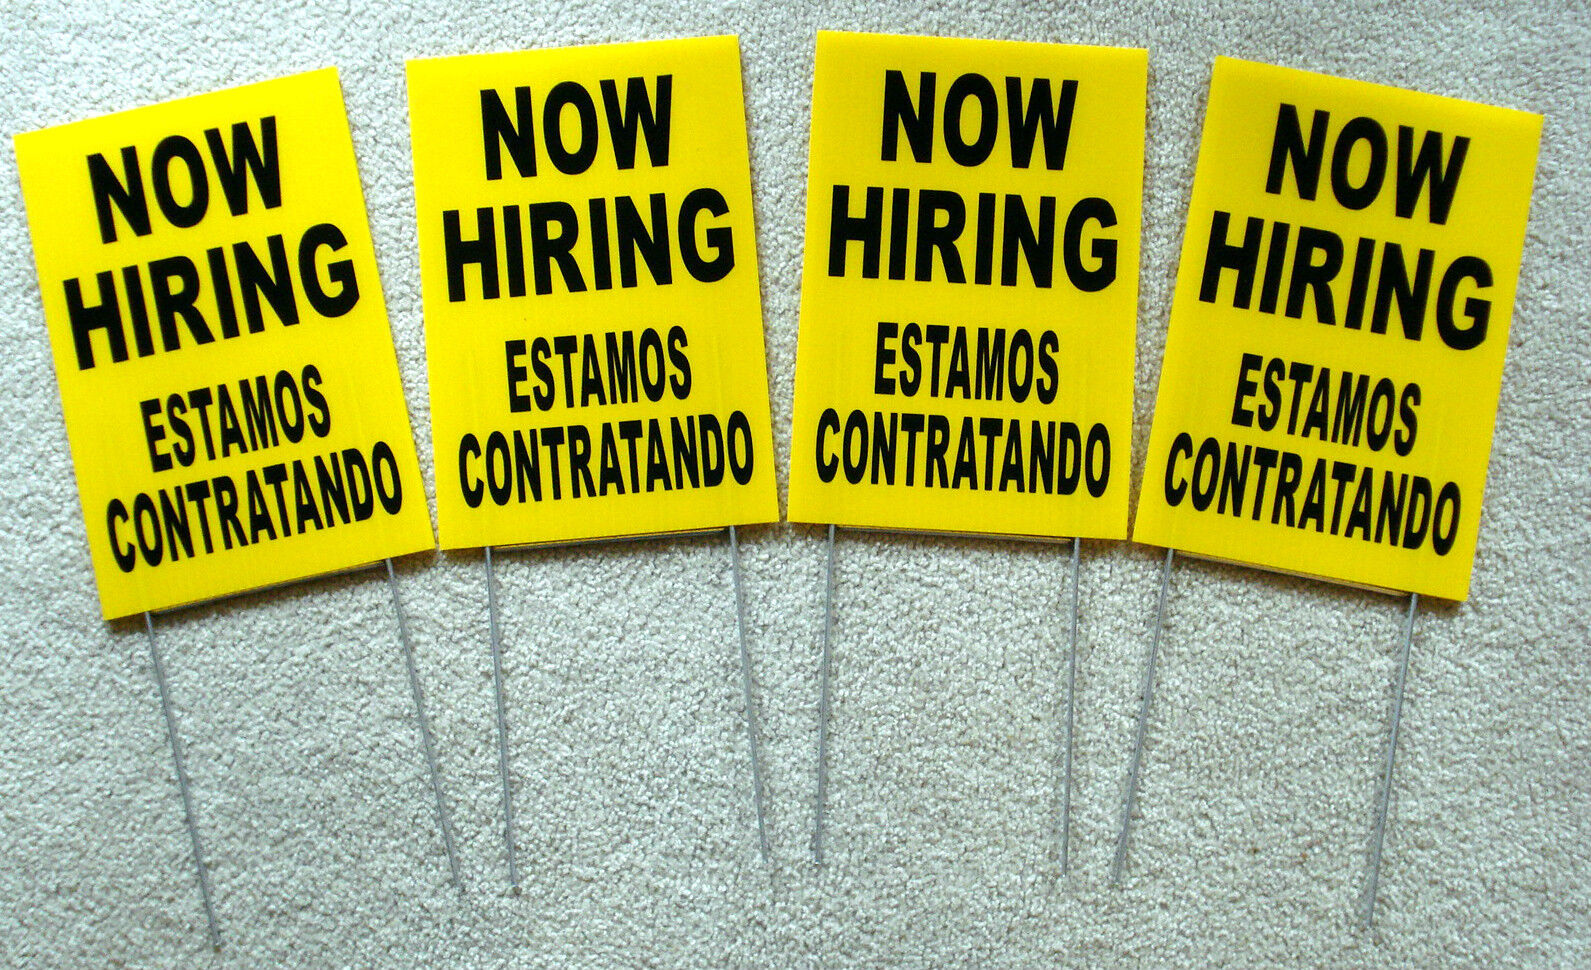 Sales of SALE items from new works 4 NOW HIRING ESTAMOS CONTRATANDO with SIGNS Coroplast safety Stakes